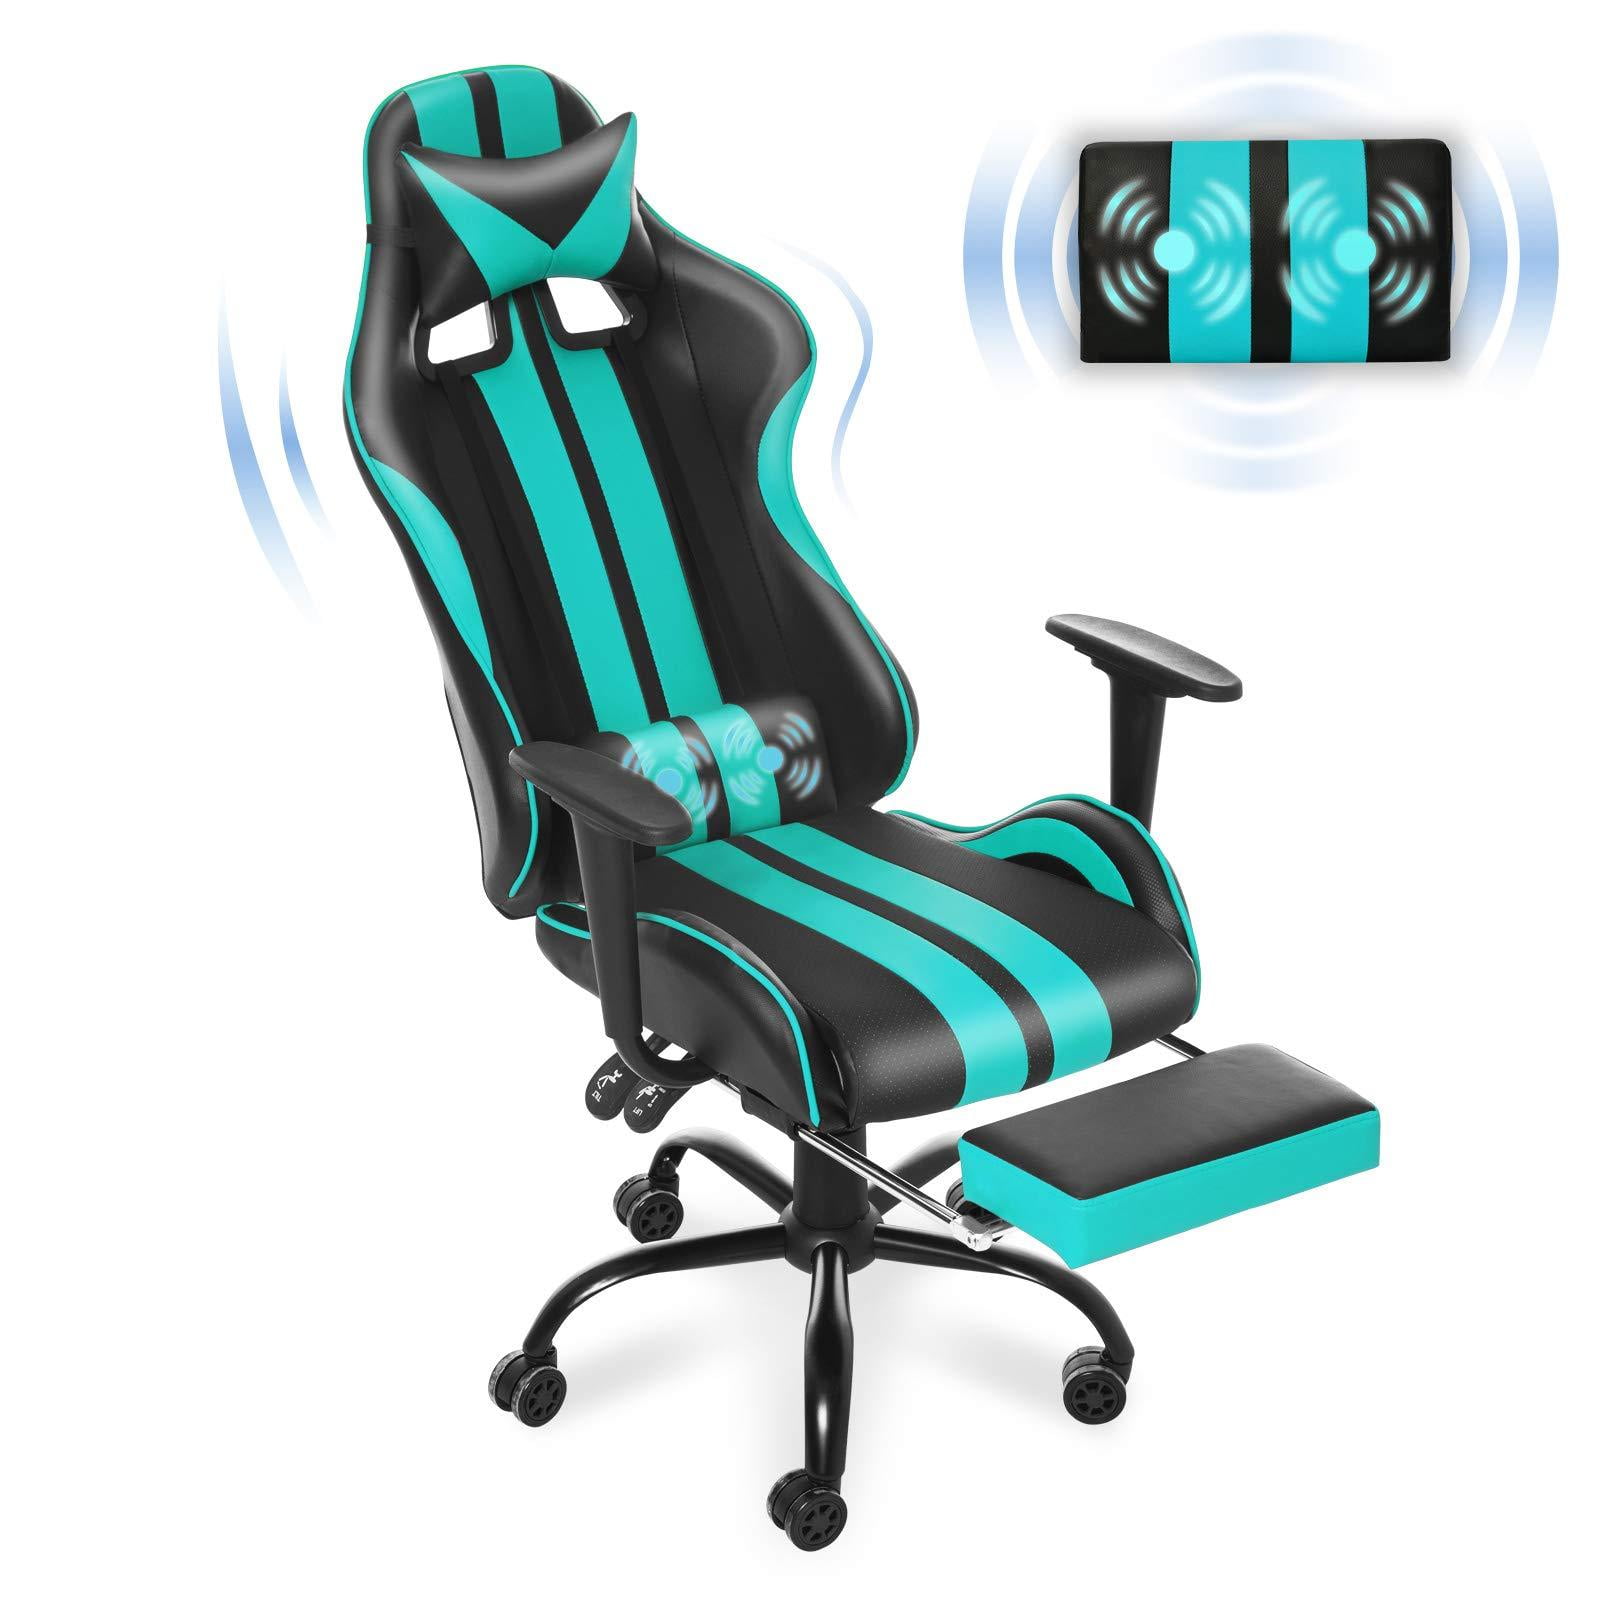 FERGHANA PC Gaming Chair,Racing Chair for Gaming,Computer Chair,E-Sports Chair,Ergonomic Office Chair with Retractable Footrest and Adjustable Headrest and Lumbar Support-Golden